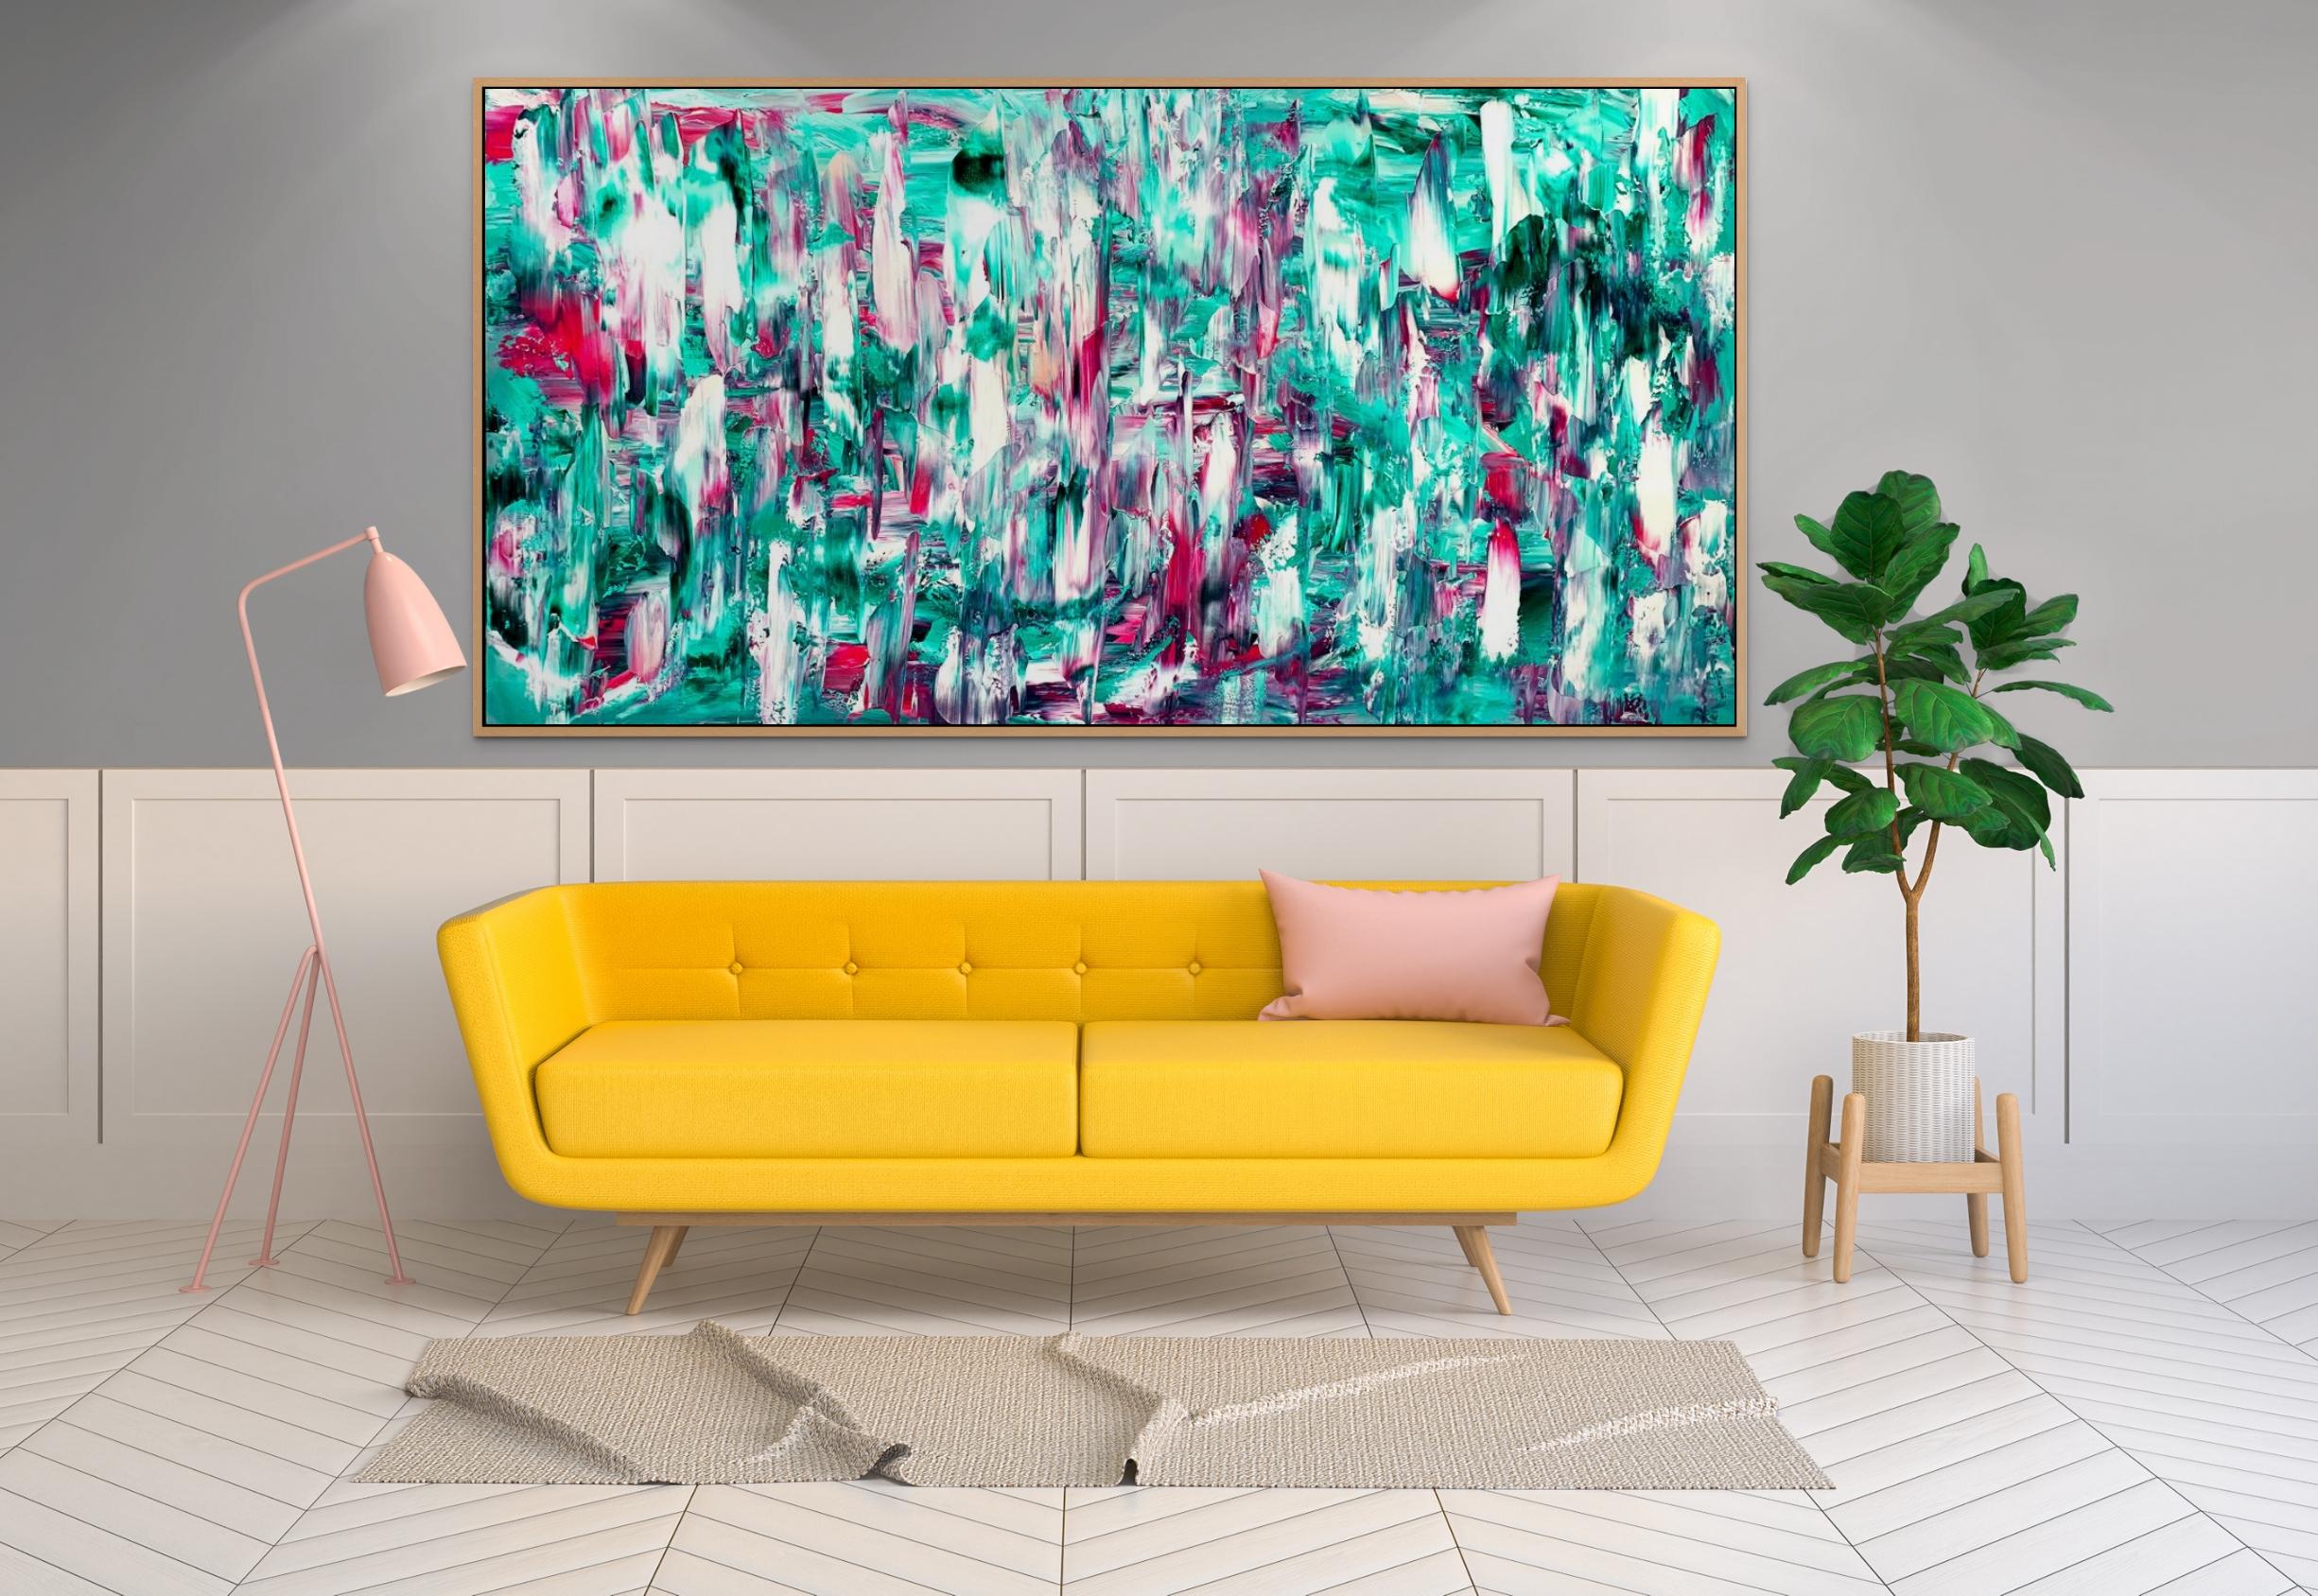 Falling - Abstract Expressionist Painting by Estelle Asmodelle